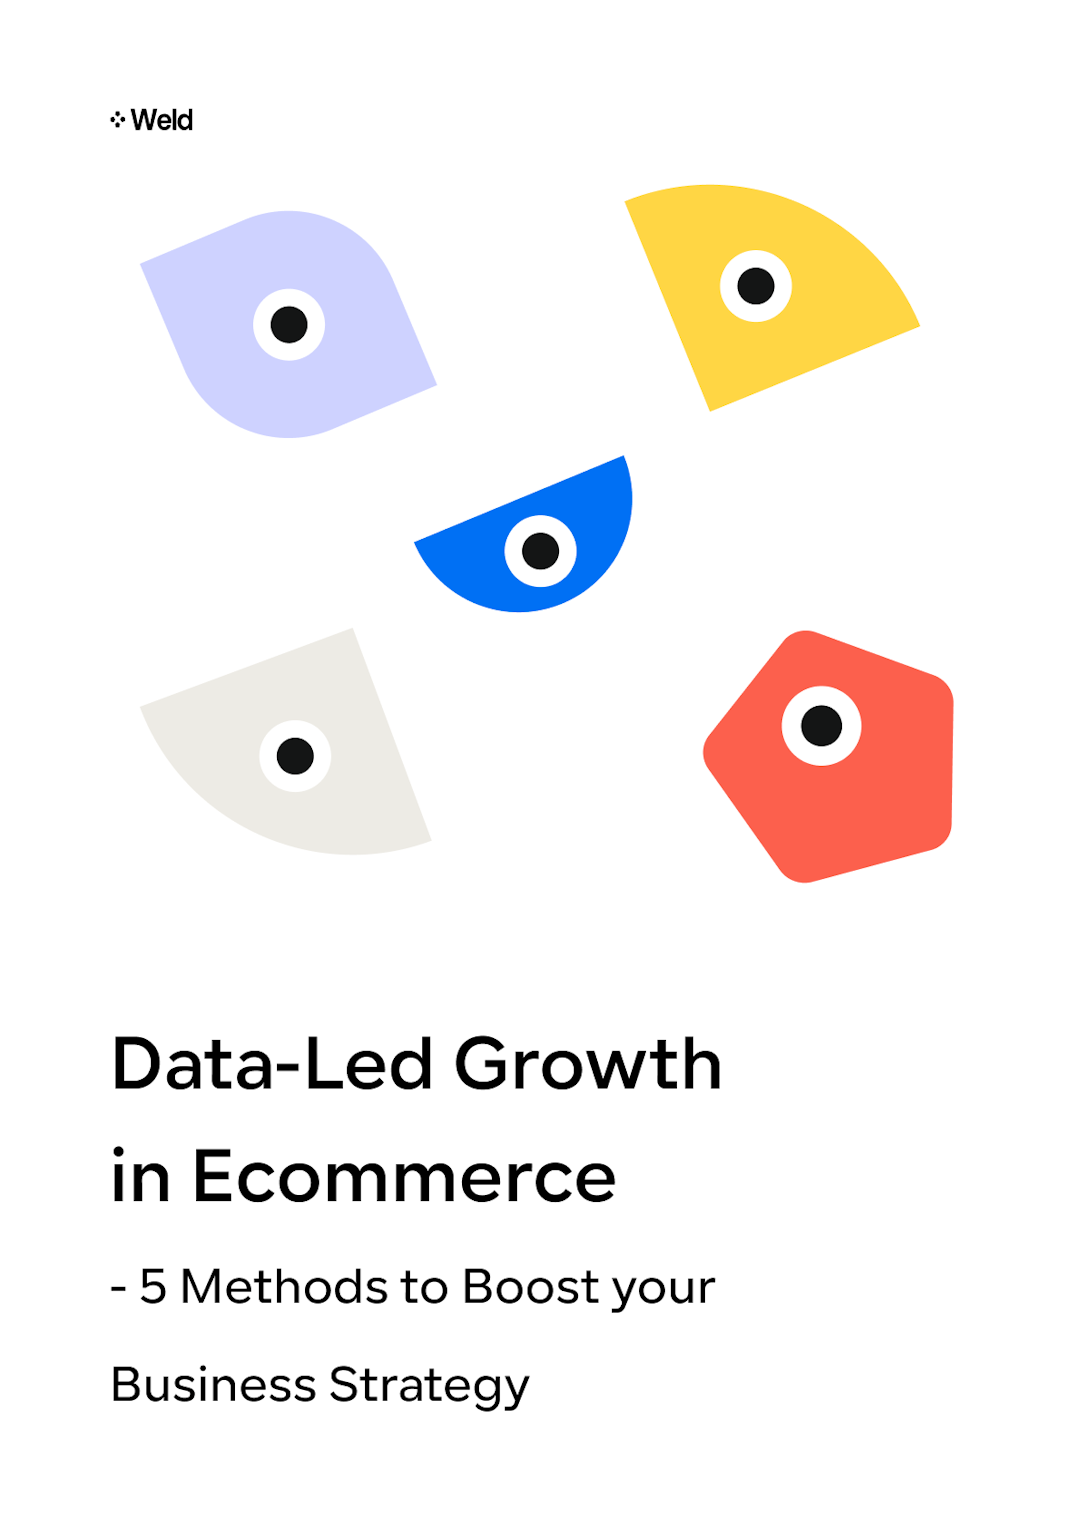 Data-Led Growth in Ecommerce: 5 Methods cover image